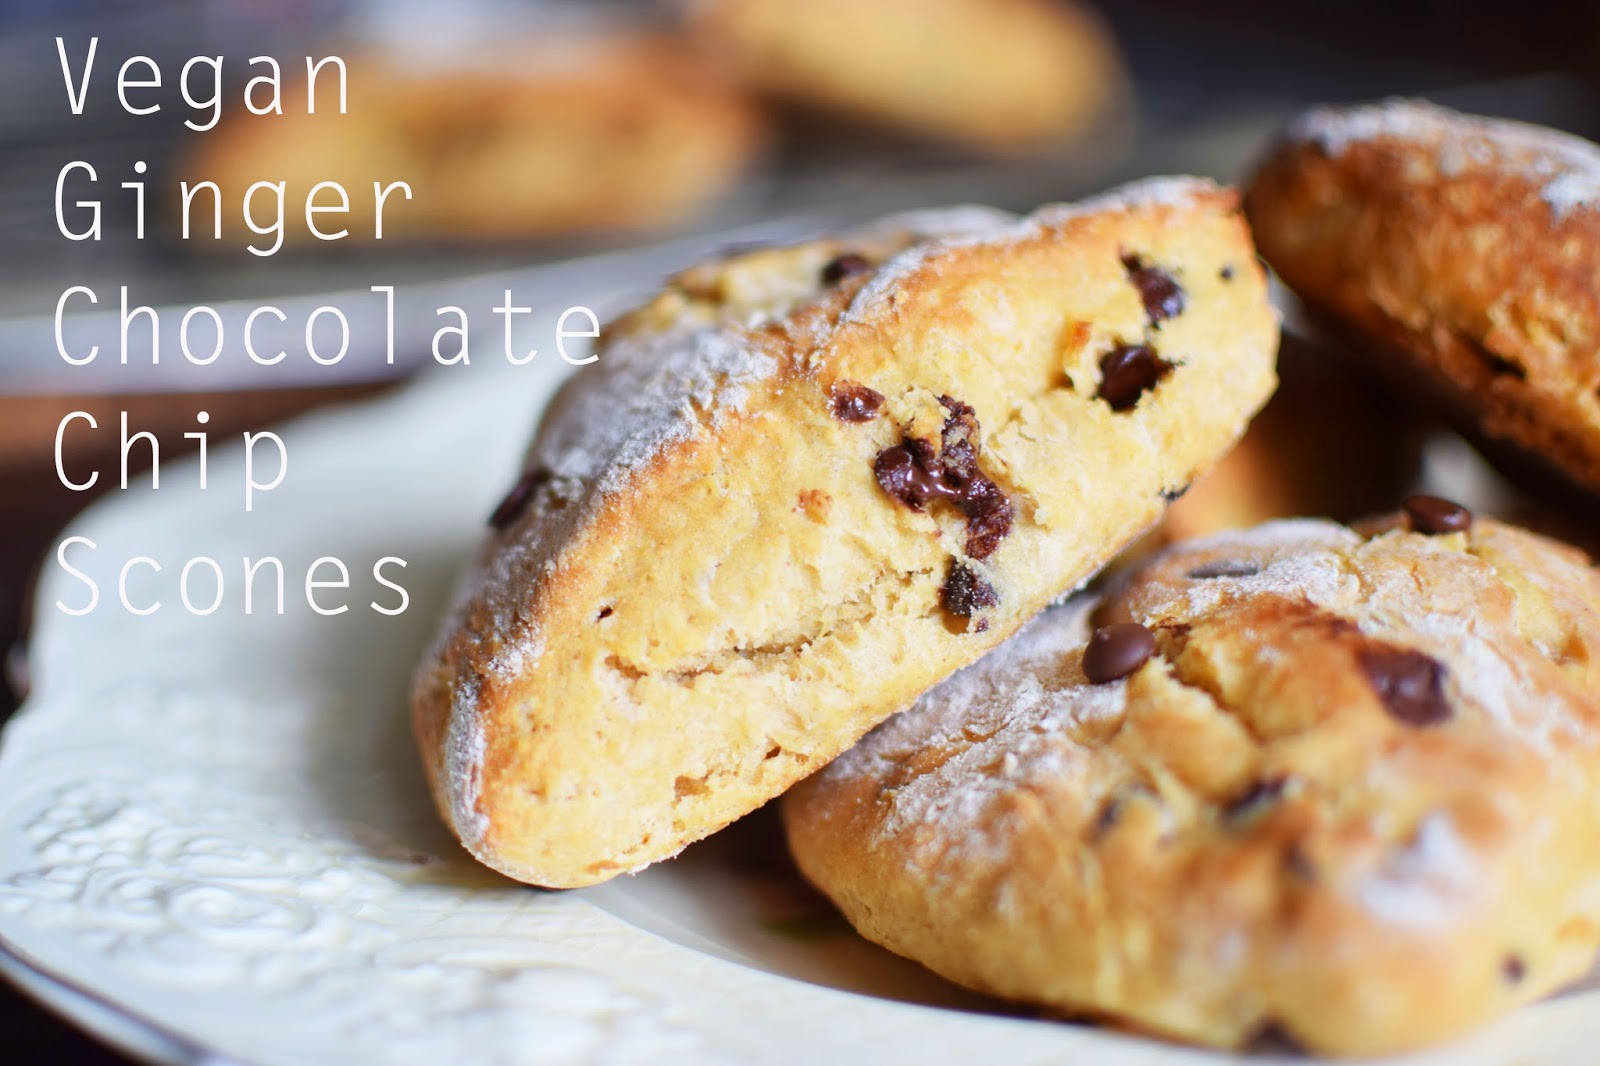 Vegan Ginger Chocolate Chip Scones - with a warming hint of ginger and a handful of delicious, gooey chocolate chips. #vegan #ginger #scones